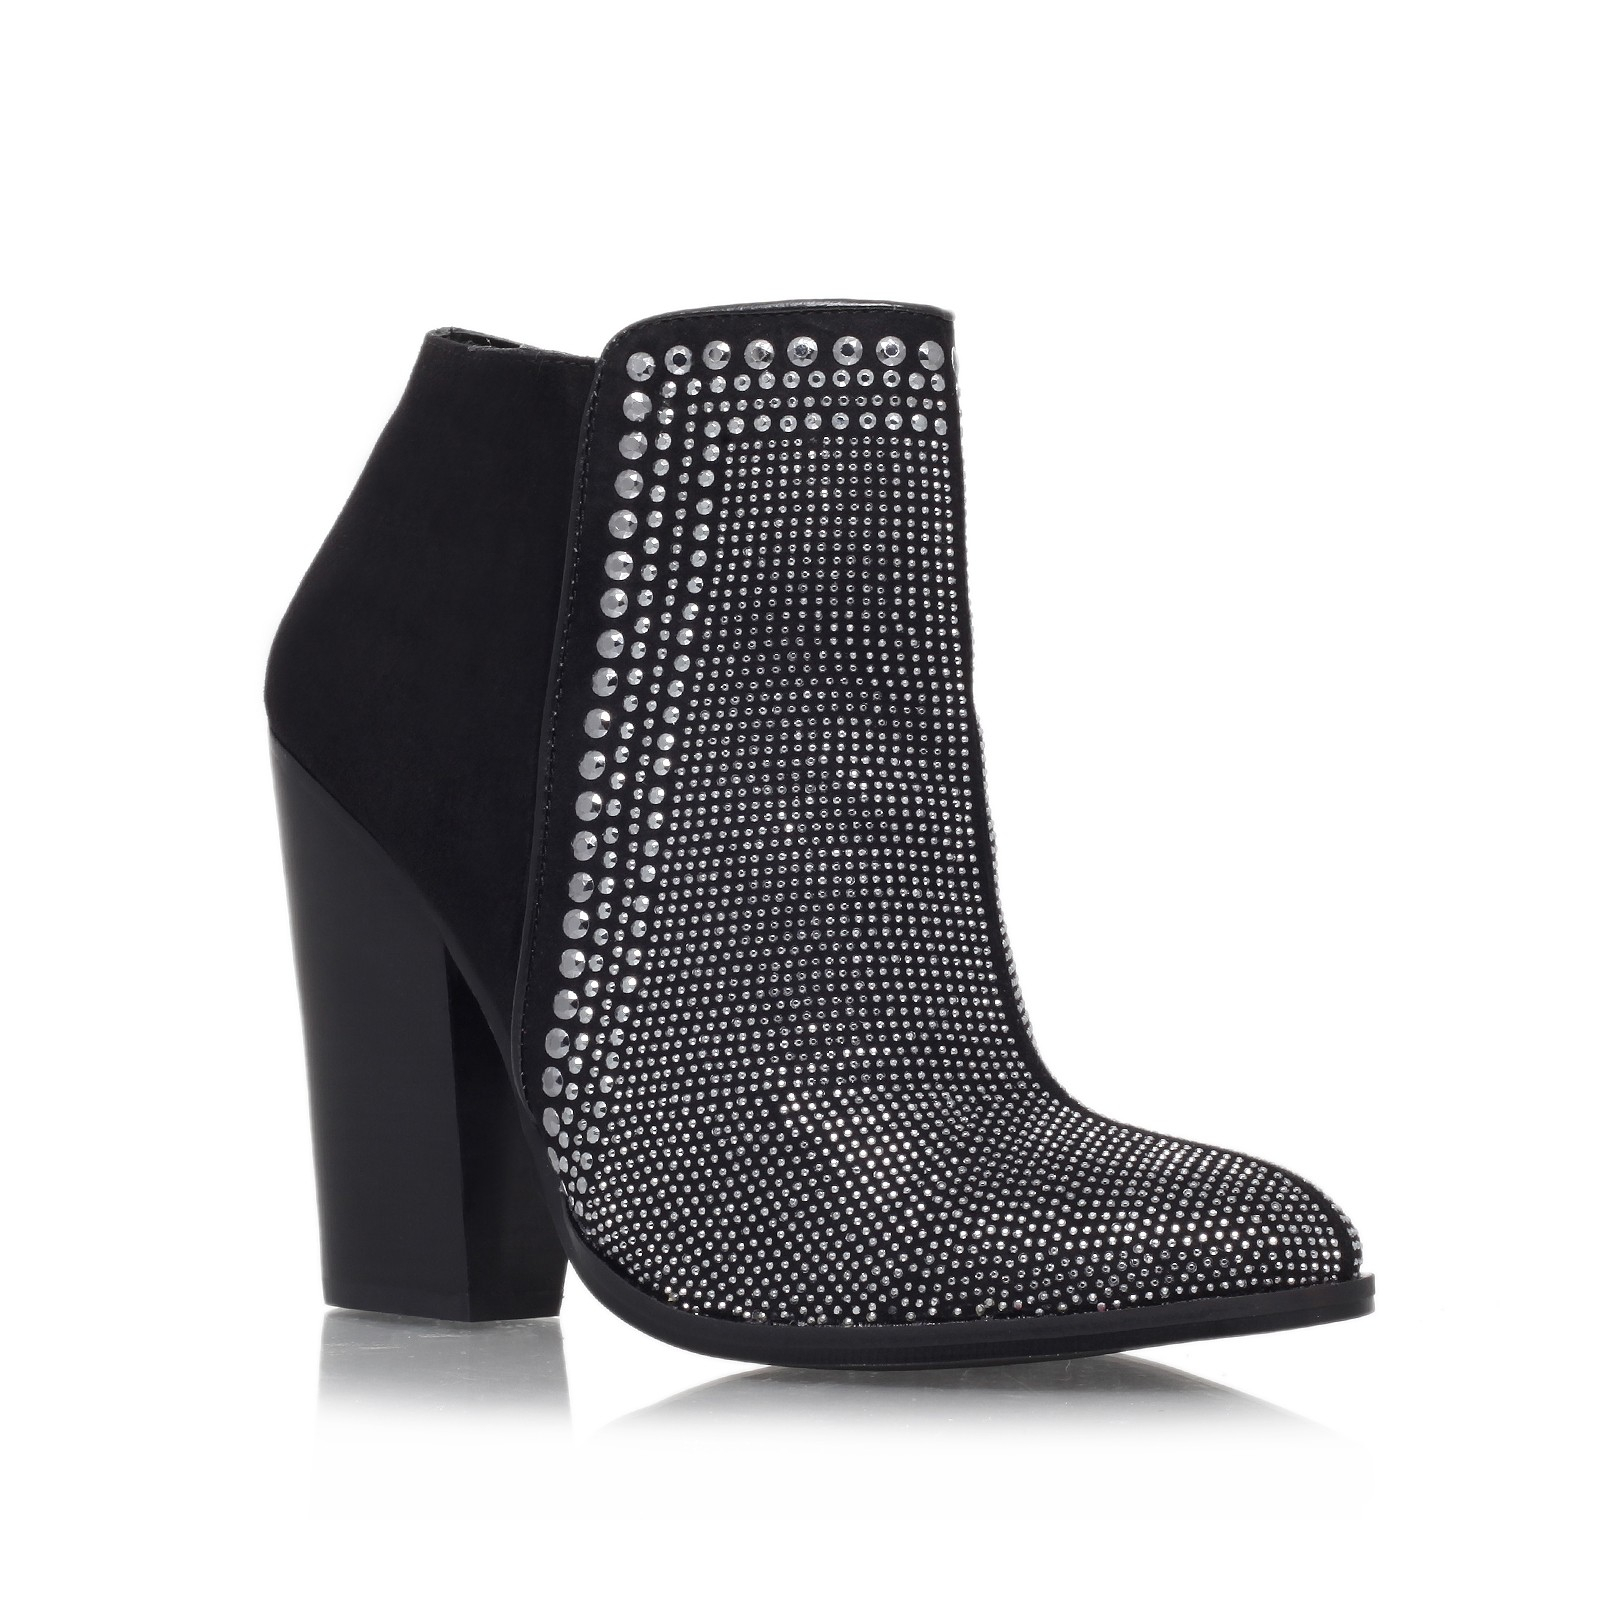 Carvela Kurt Geiger Leather Special Studded Ankle Boots in Black - Lyst